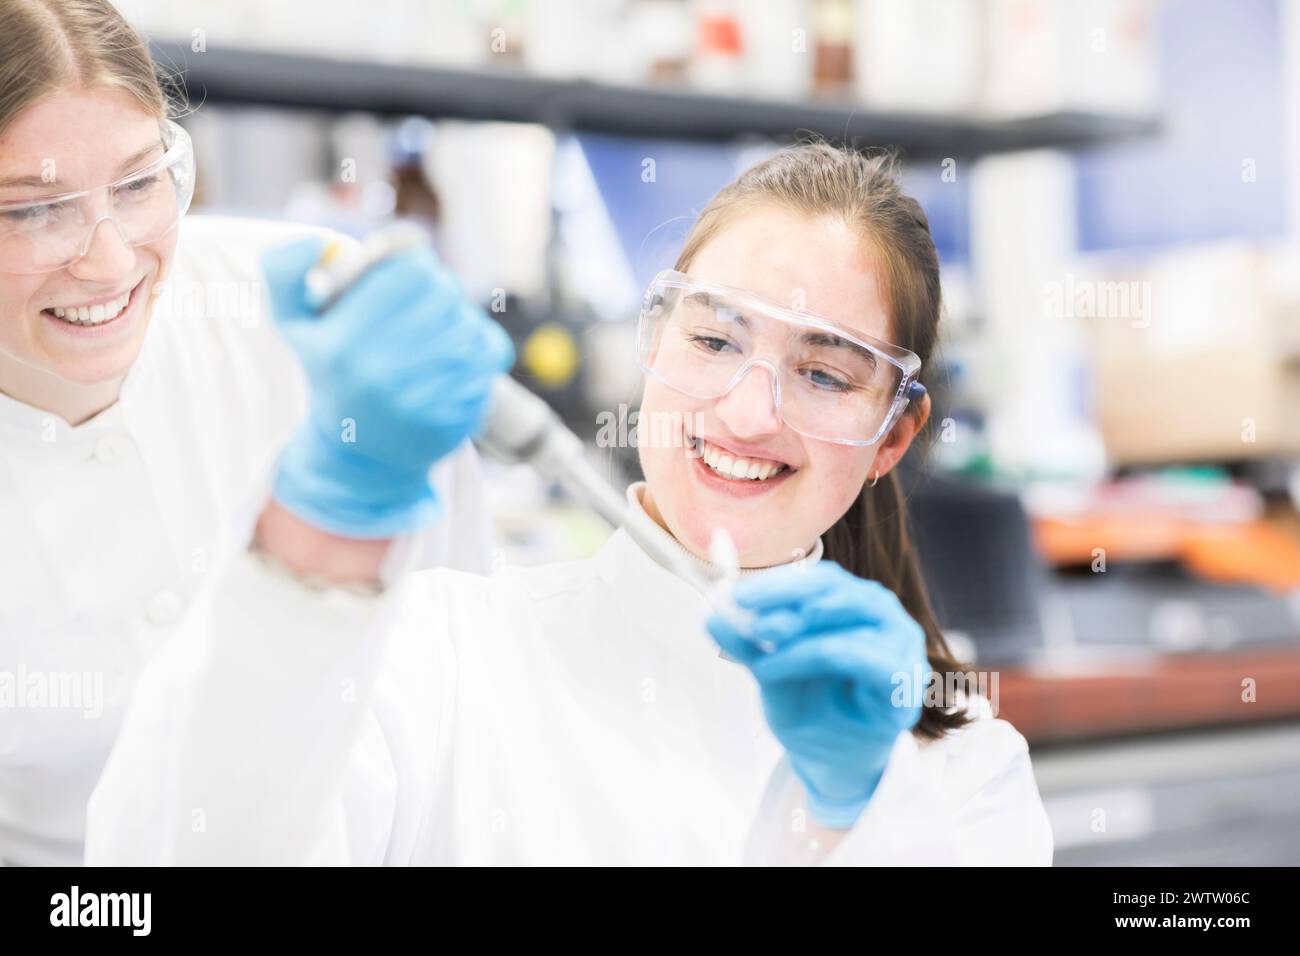 Two scientists sharing a moment of discovery in the lab. Stock Photo